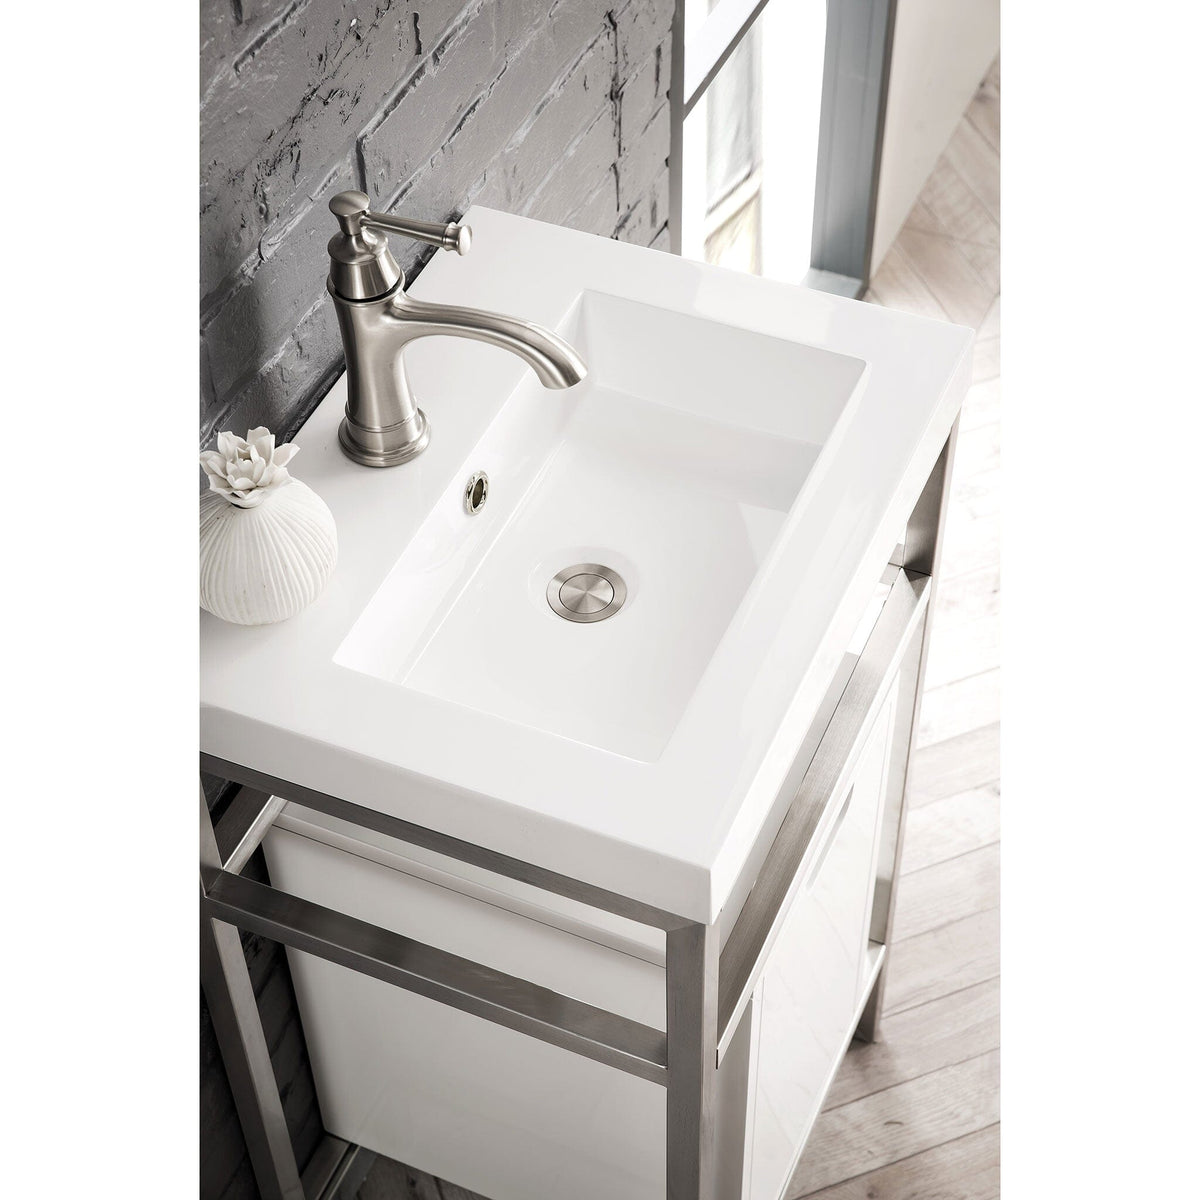 20" Boston Single Sink Console, Brushed Nickel w/ Storage Cabinet, White Glossy Resin Countertop